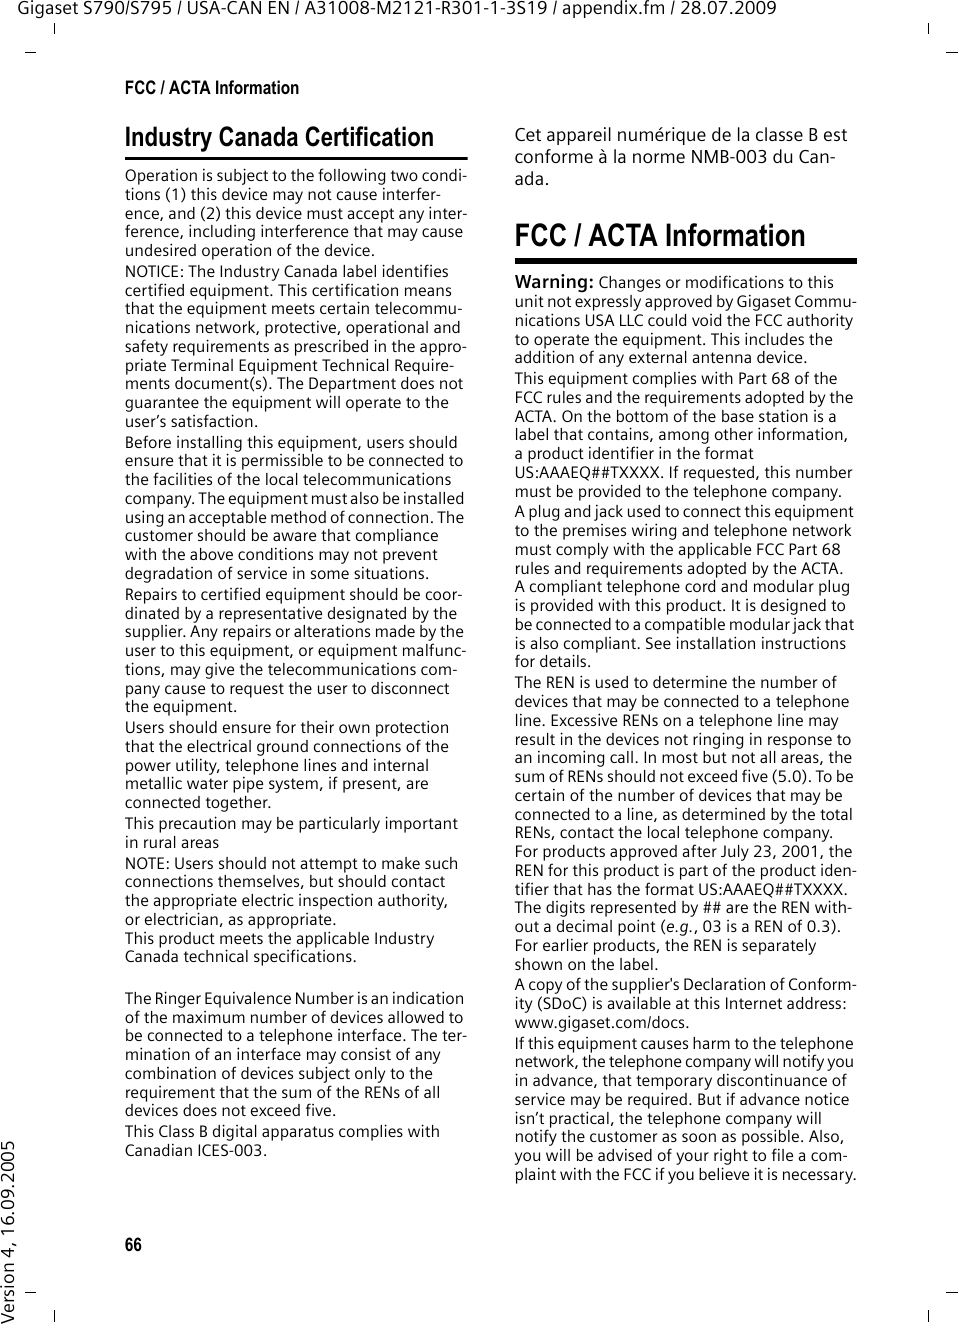 66FCC / ACTA InformationGigaset S790/S795 / USA-CAN EN / A31008-M2121-R301-1-3S19 / appendix.fm / 28.07.2009Version 4, 16.09.2005Industry Canada CertificationOperation is subject to the following two condi-tions (1) this device may not cause interfer-ence, and (2) this device must accept any inter-ference, including interference that may cause undesired operation of the device.NOTICE: The Industry Canada label identifies certified equipment. This certification means that the equipment meets certain telecommu-nications network, protective, operational and safety requirements as prescribed in the appro-priate Terminal Equipment Technical Require-ments document(s). The Department does not guarantee the equipment will operate to the user’s satisfaction.Before installing this equipment, users should ensure that it is permissible to be connected to the facilities of the local telecommunications company. The equipment must also be installed using an acceptable method of connection. The customer should be aware that compliance with the above conditions may not prevent degradation of service in some situations.Repairs to certified equipment should be coor-dinated by a representative designated by the supplier. Any repairs or alterations made by the user to this equipment, or equipment malfunc-tions, may give the telecommunications com-pany cause to request the user to disconnect the equipment.Users should ensure for their own protection that the electrical ground connections of the power utility, telephone lines and internal metallic water pipe system, if present, are connected together.This precaution may be particularly important in rural areasNOTE: Users should not attempt to make such connections themselves, but should contact the appropriate electric inspection authority, or electrician, as appropriate.This product meets the applicable Industry Canada technical specifications.The Ringer Equivalence Number is an indication of the maximum number of devices allowed to be connected to a telephone interface. The ter-mination of an interface may consist of any combination of devices subject only to the requirement that the sum of the RENs of all devices does not exceed five.This Class B digital apparatus complies with Canadian ICES-003.Cet appareil numérique de la classe B est conforme à la norme NMB-003 du Can-ada.FCC / ACTA InformationWarning: Changes or modifications to this unit not expressly approved by Gigaset Commu-nications USA LLC could void the FCC authority to operate the equipment. This includes the addition of any external antenna device.This equipment complies with Part 68 of the FCC rules and the requirements adopted by the ACTA. On the bottom of the base station is a label that contains, among other information, a product identifier in the format US:AAAEQ##TXXXX. If requested, this number must be provided to the telephone company.A plug and jack used to connect this equipment to the premises wiring and telephone network must comply with the applicable FCC Part 68 rules and requirements adopted by the ACTA. A compliant telephone cord and modular plug is provided with this product. It is designed to be connected to a compatible modular jack that is also compliant. See installation instructions for details.The REN is used to determine the number of devices that may be connected to a telephone line. Excessive RENs on a telephone line may result in the devices not ringing in response to an incoming call. In most but not all areas, the sum of RENs should not exceed five (5.0). To be certain of the number of devices that may be connected to a line, as determined by the total RENs, contact the local telephone company. For products approved after July 23, 2001, the REN for this product is part of the product iden-tifier that has the format US:AAAEQ##TXXXX. The digits represented by ## are the REN with-out a decimal point (e.g., 03 is a REN of 0.3). For earlier products, the REN is separately shown on the label.A copy of the supplier&apos;s Declaration of Conform-ity (SDoC) is available at this Internet address: www.gigaset.com/docs.If this equipment causes harm to the telephone network, the telephone company will notify you in advance, that temporary discontinuance of service may be required. But if advance notice isn’t practical, the telephone company will notify the customer as soon as possible. Also, you will be advised of your right to file a com-plaint with the FCC if you believe it is necessary.